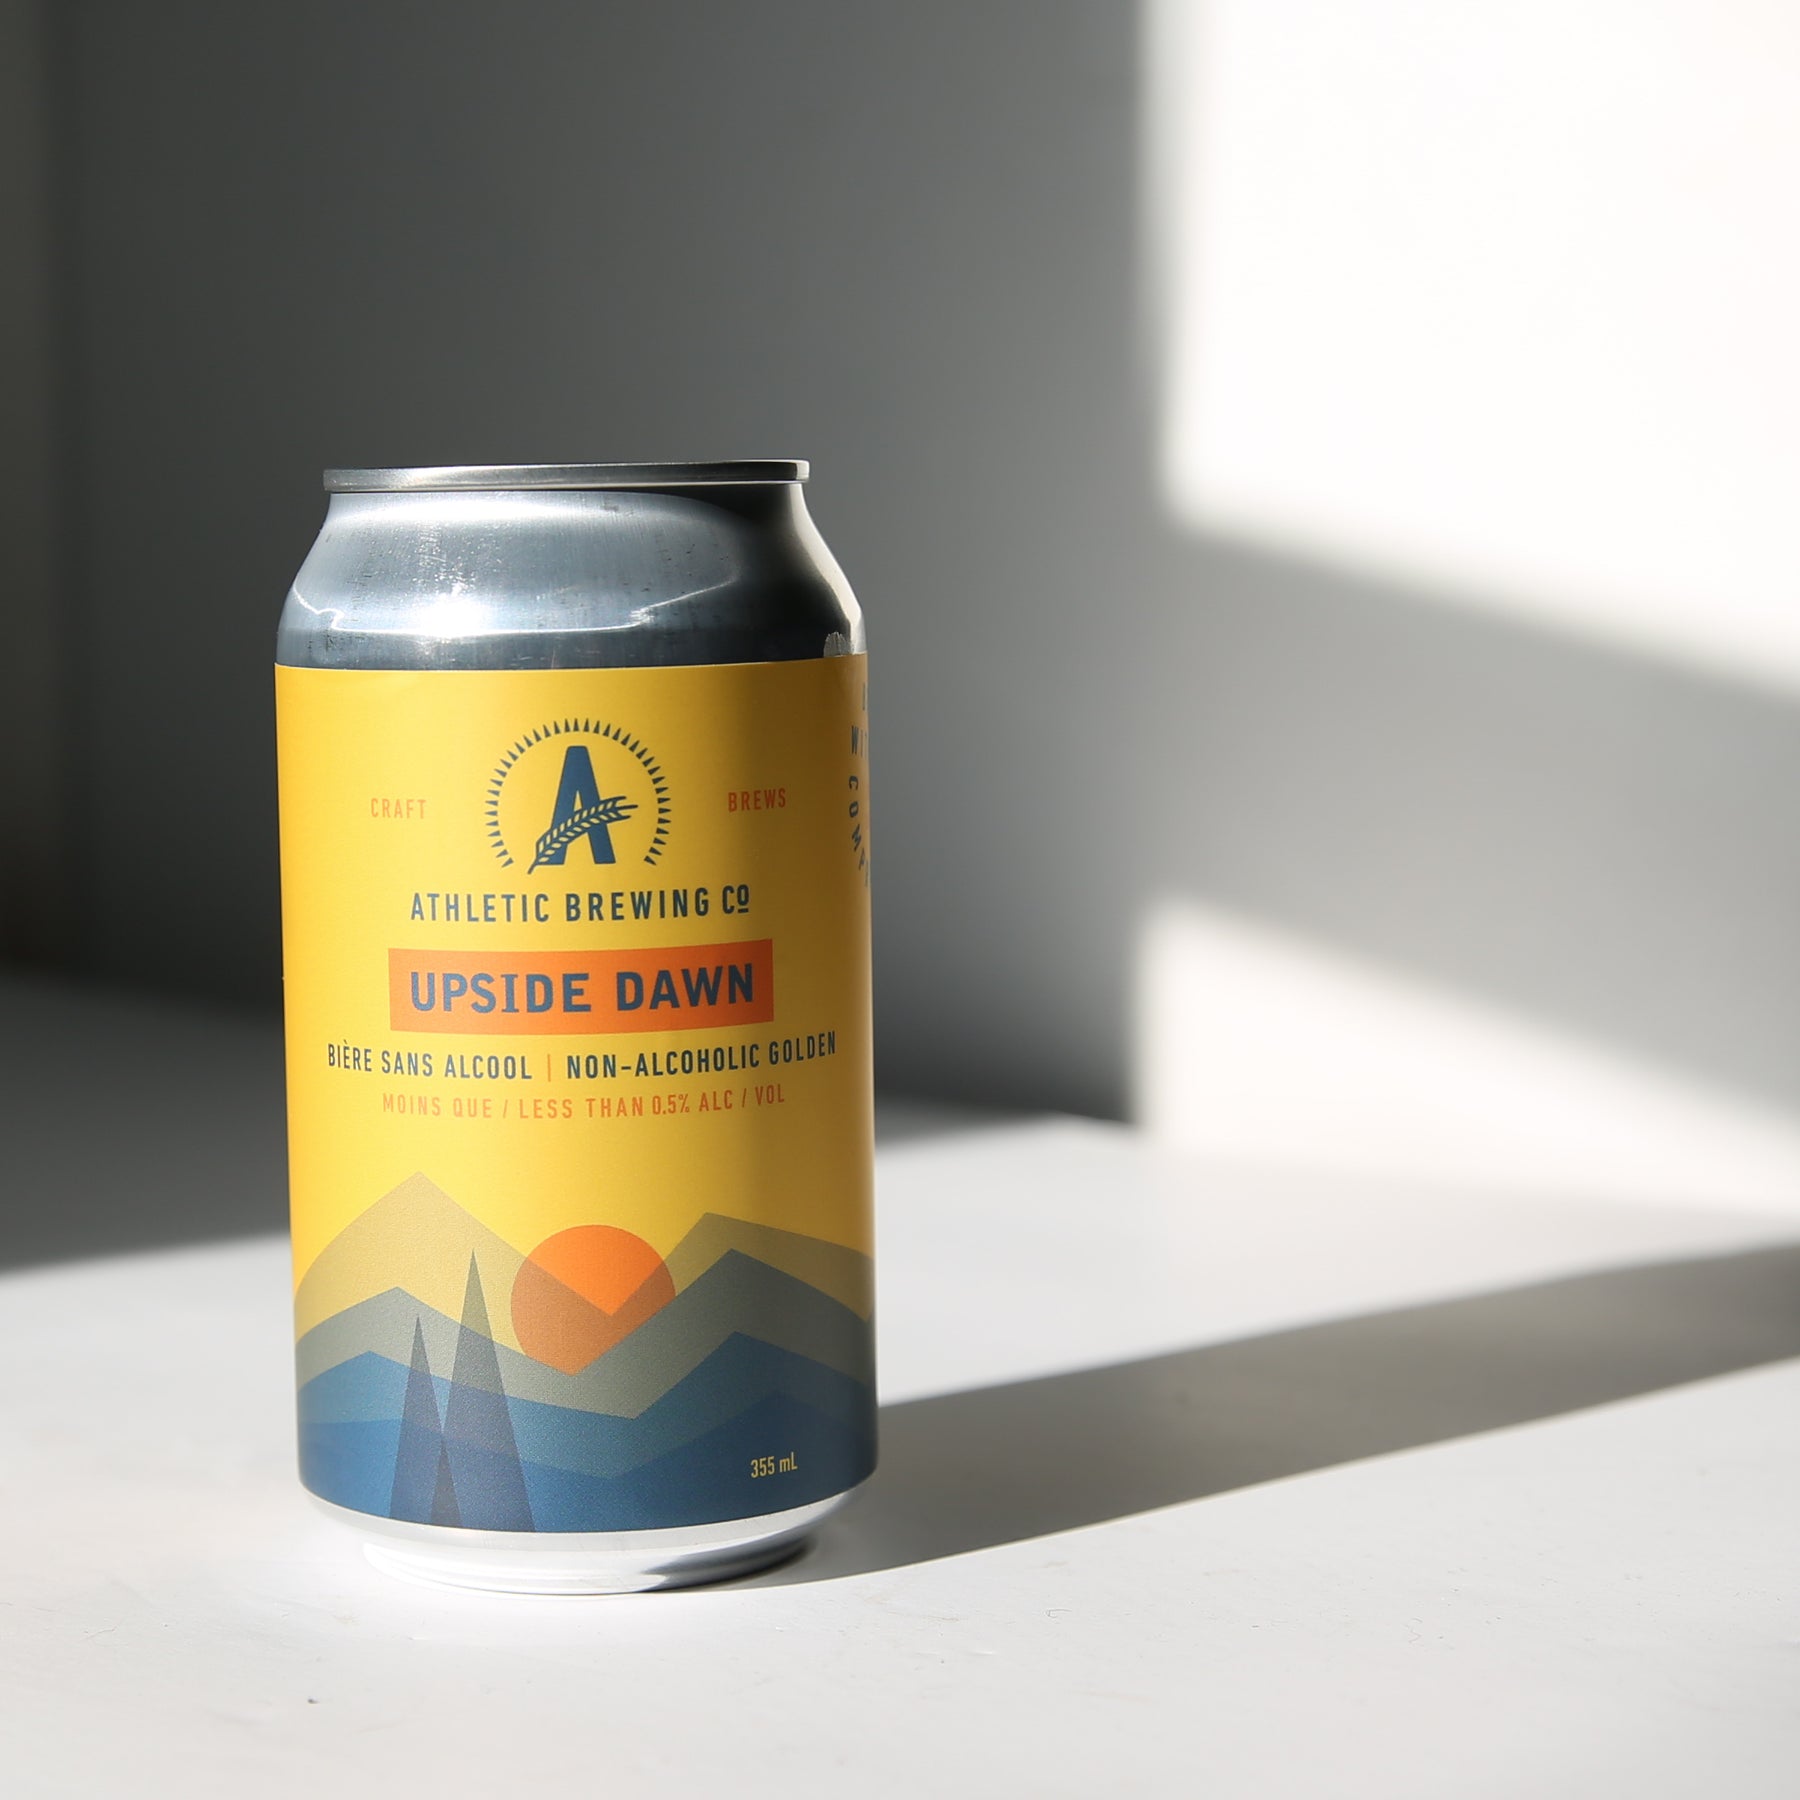 Athletic Brewing Co. Upside Dawn Non-Alcoholic Golden Ale